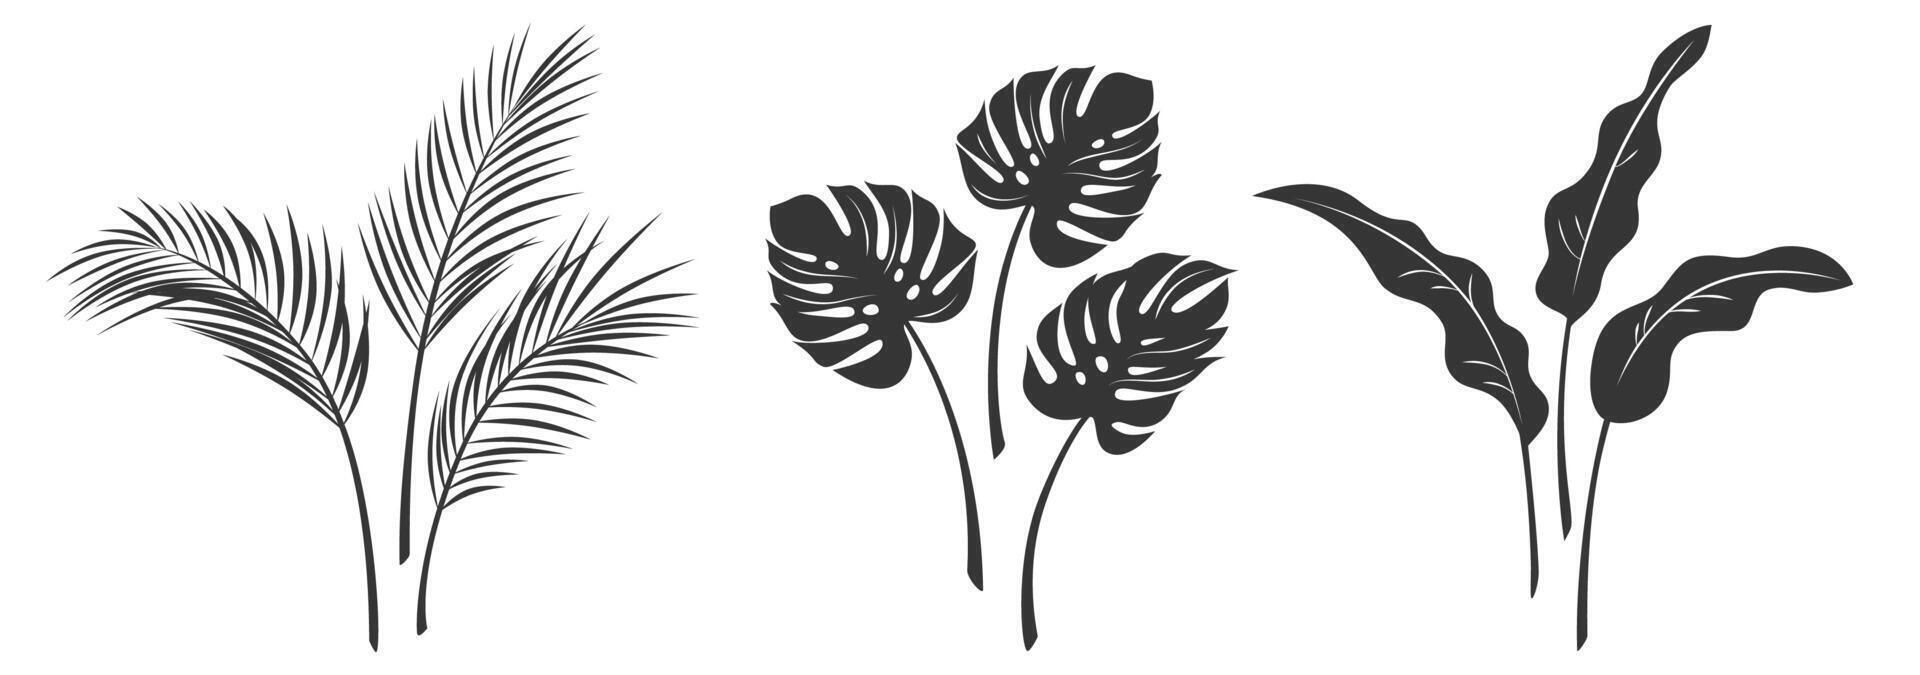 Set of silhouettes of palm leaves isolated on a white background. Vector illustration